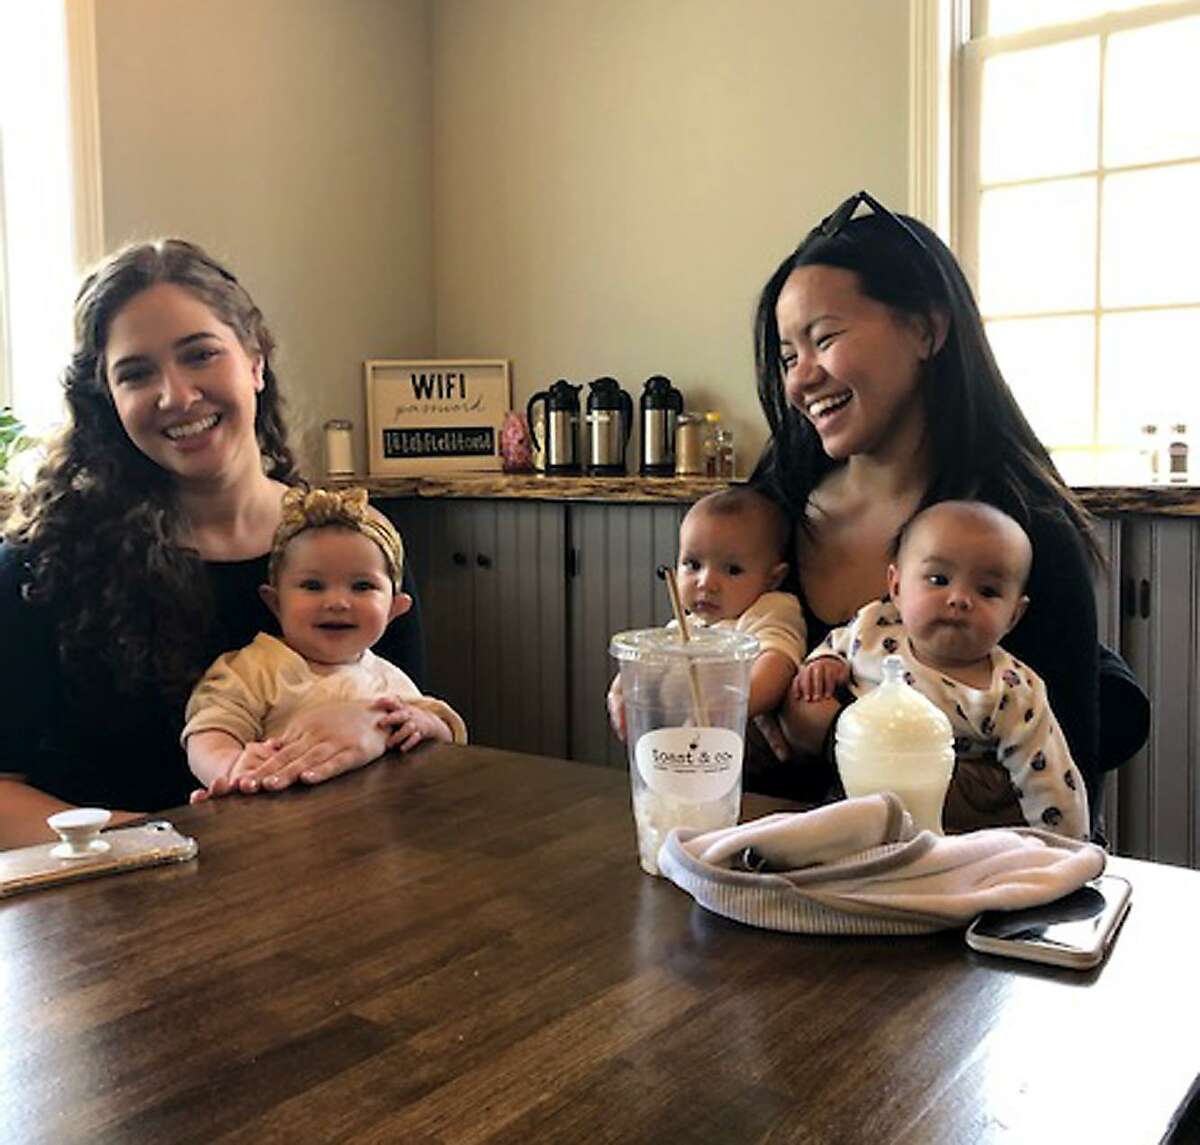 Miranda Gordon of Litchfield with baby Isla, left, and Razina Rintharme of Litchfield with twins Ryan Jr. and Leila enjoy the fare at Toast & Co.